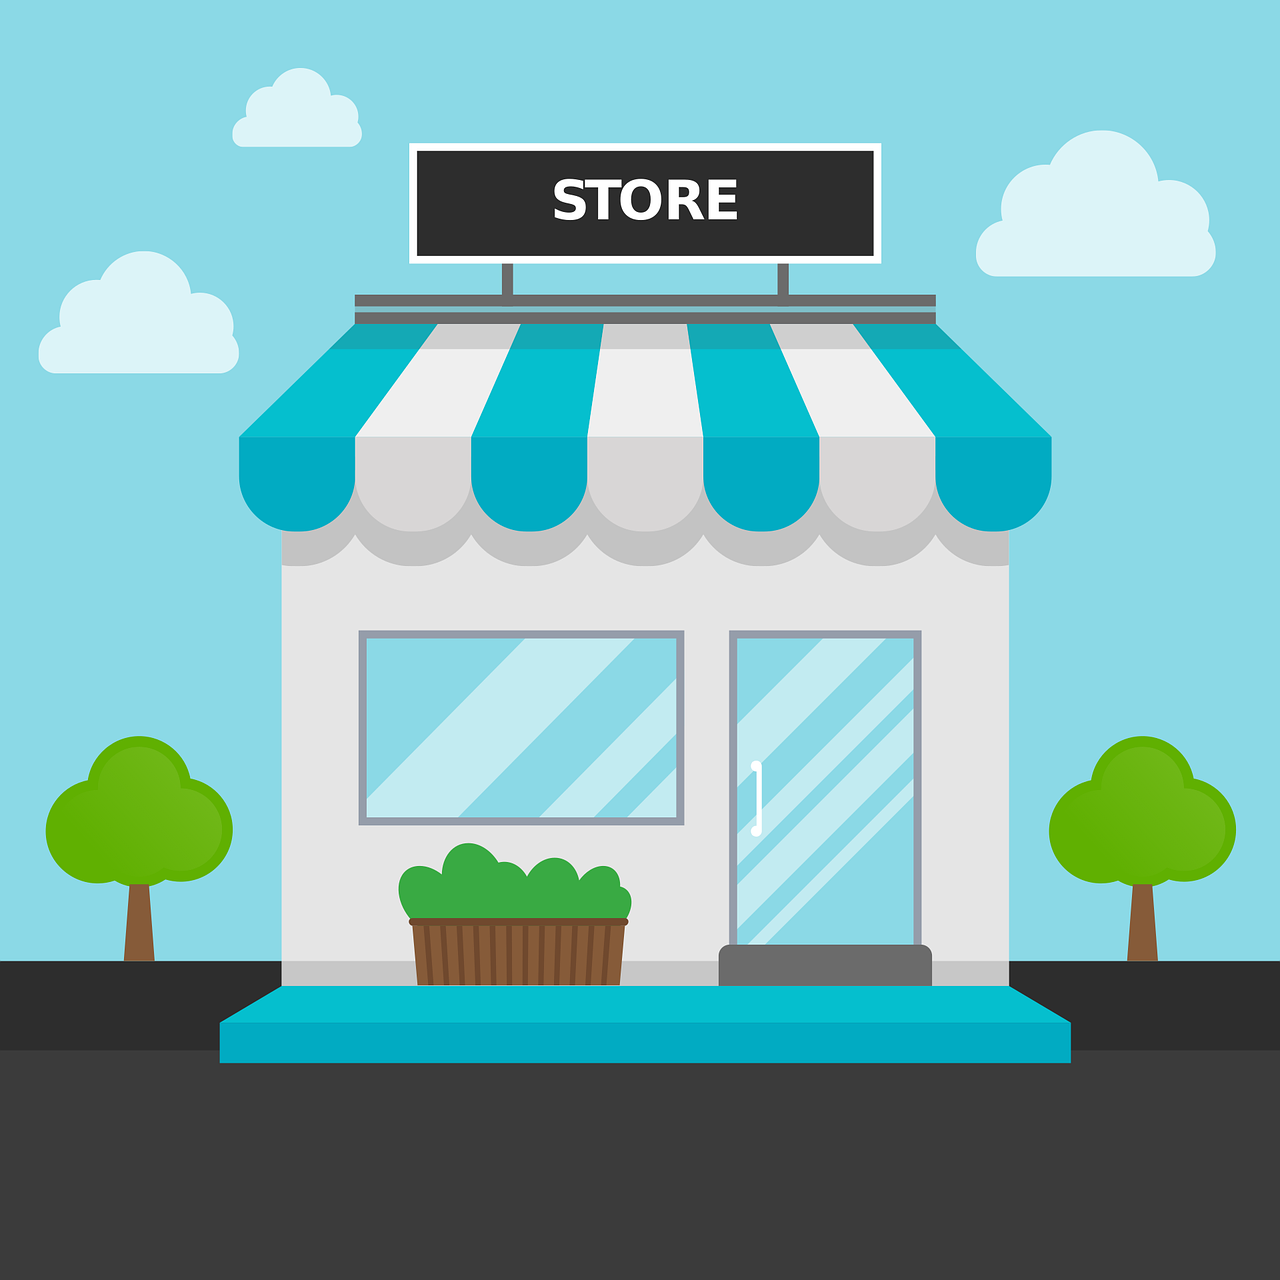 The Illustration shows a retail store